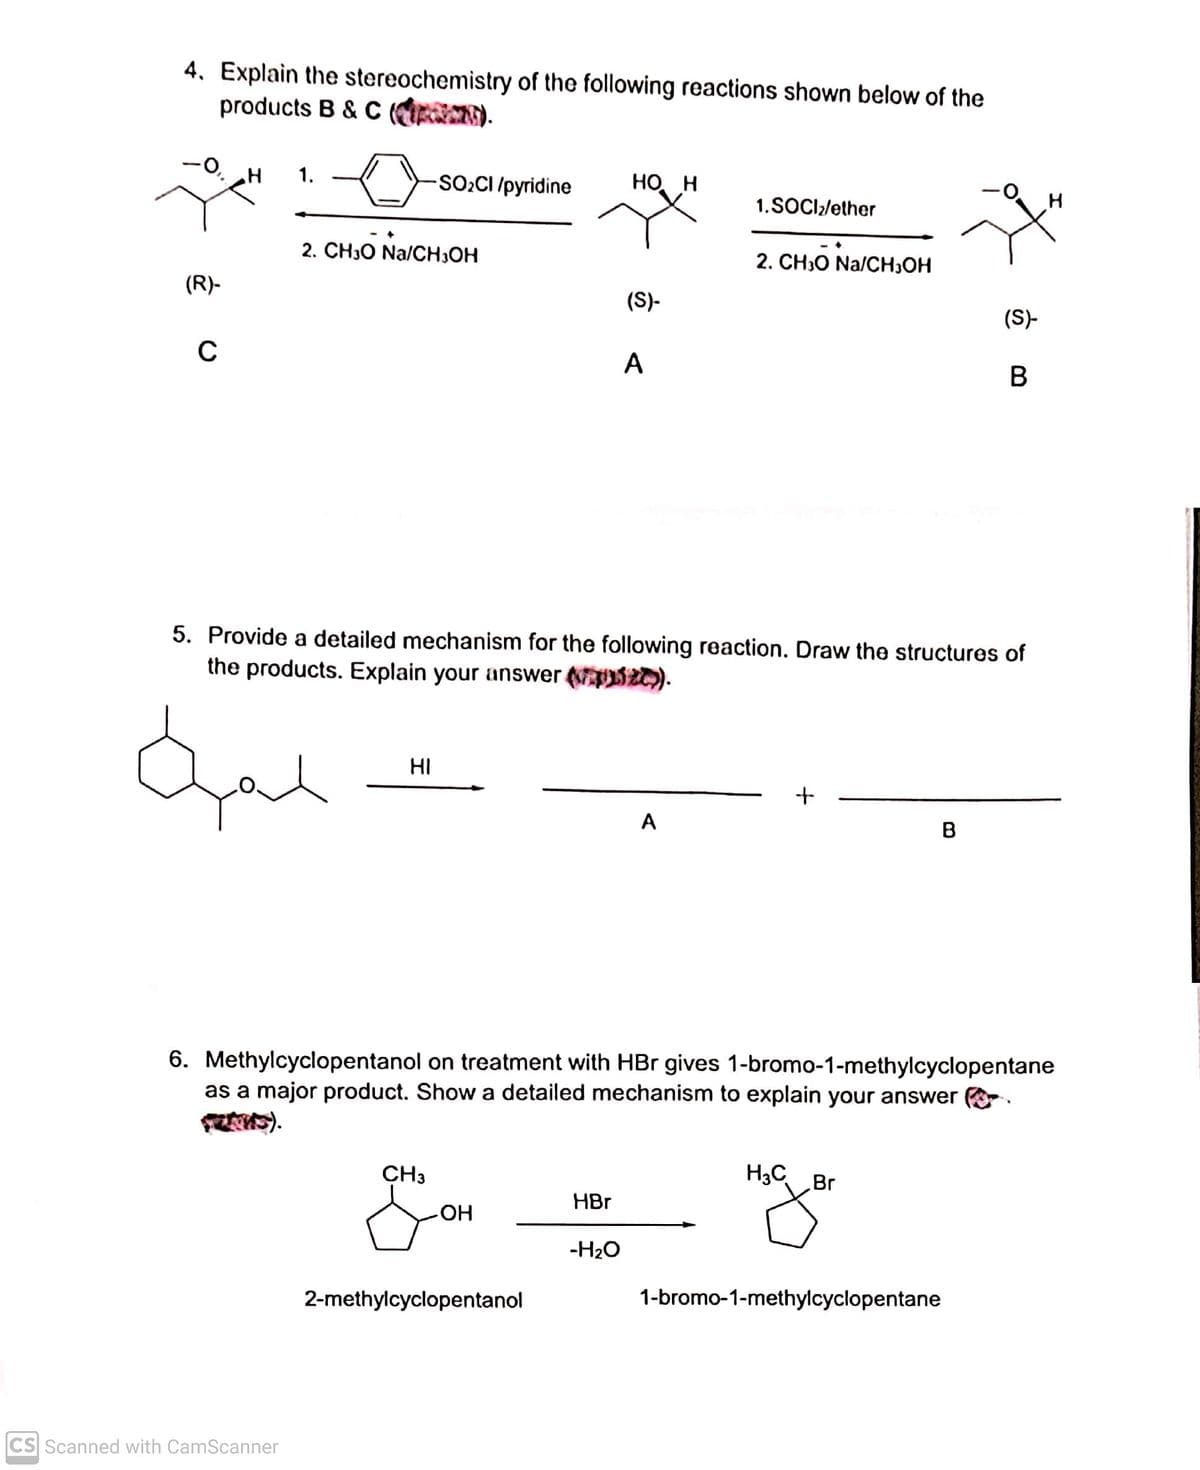 4. Explain the stereochemistry of the following reactions shown below of the
products B & C (OR).
1.
SO2CI /pyridine
HO H
1.SOCI/ether
2. CH30 Na/CH,OH
2. CH;O Na/CH,OH
(R)-
(S)-
(S)-
A
B
5. Provide a detailed mechanism for the following reaction. Draw the structures of
the products. Explain your answer S).
HI
A
B
6. Methylcyclopentanol on treatment with HBr gives 1-bromo-1-methylcyclopentane
as a major product. Show a detailed mechanism to explain your answer .
S).
CH3
H3C
Br
HBr
но-
-H2O
2-methylcyclopentanol
1-bromo-1-methylcyclopentane
CS Scanned with CamScanner
